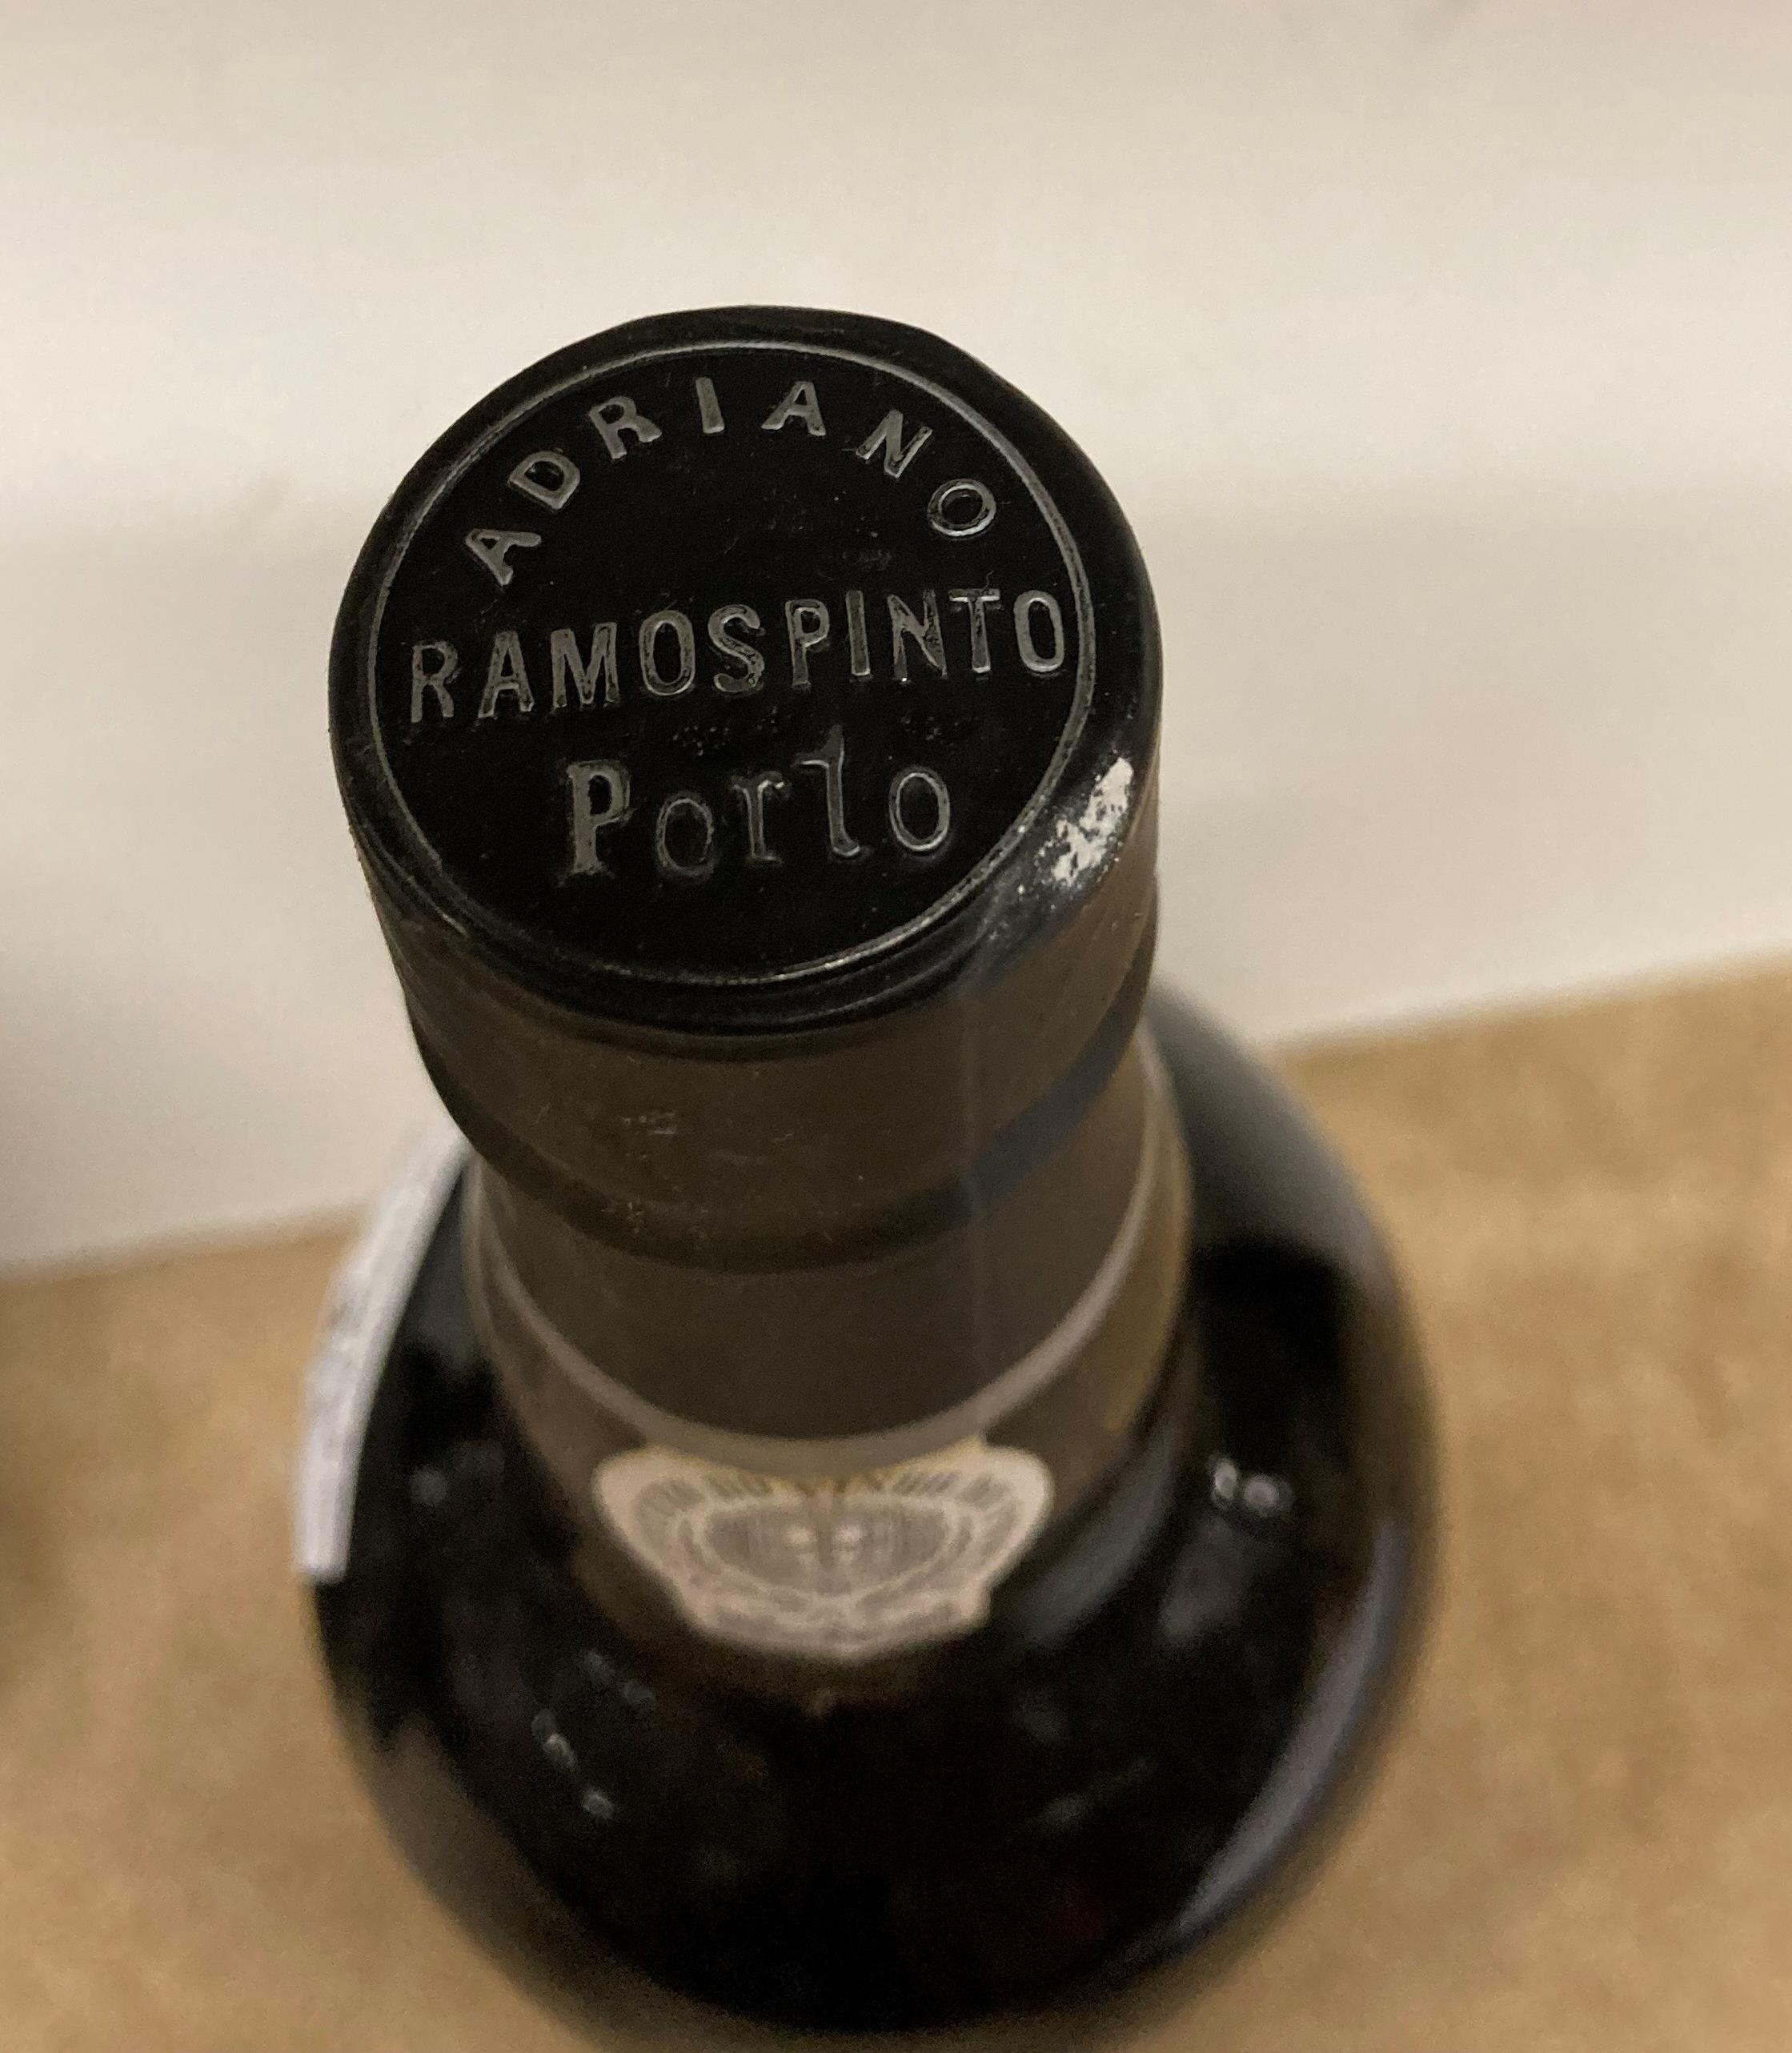 Two 75cl bottles of Porto Vintage 1985 Port shipped by Adriano Ramos-Pinto and a 75cl bottle of - Image 4 of 4